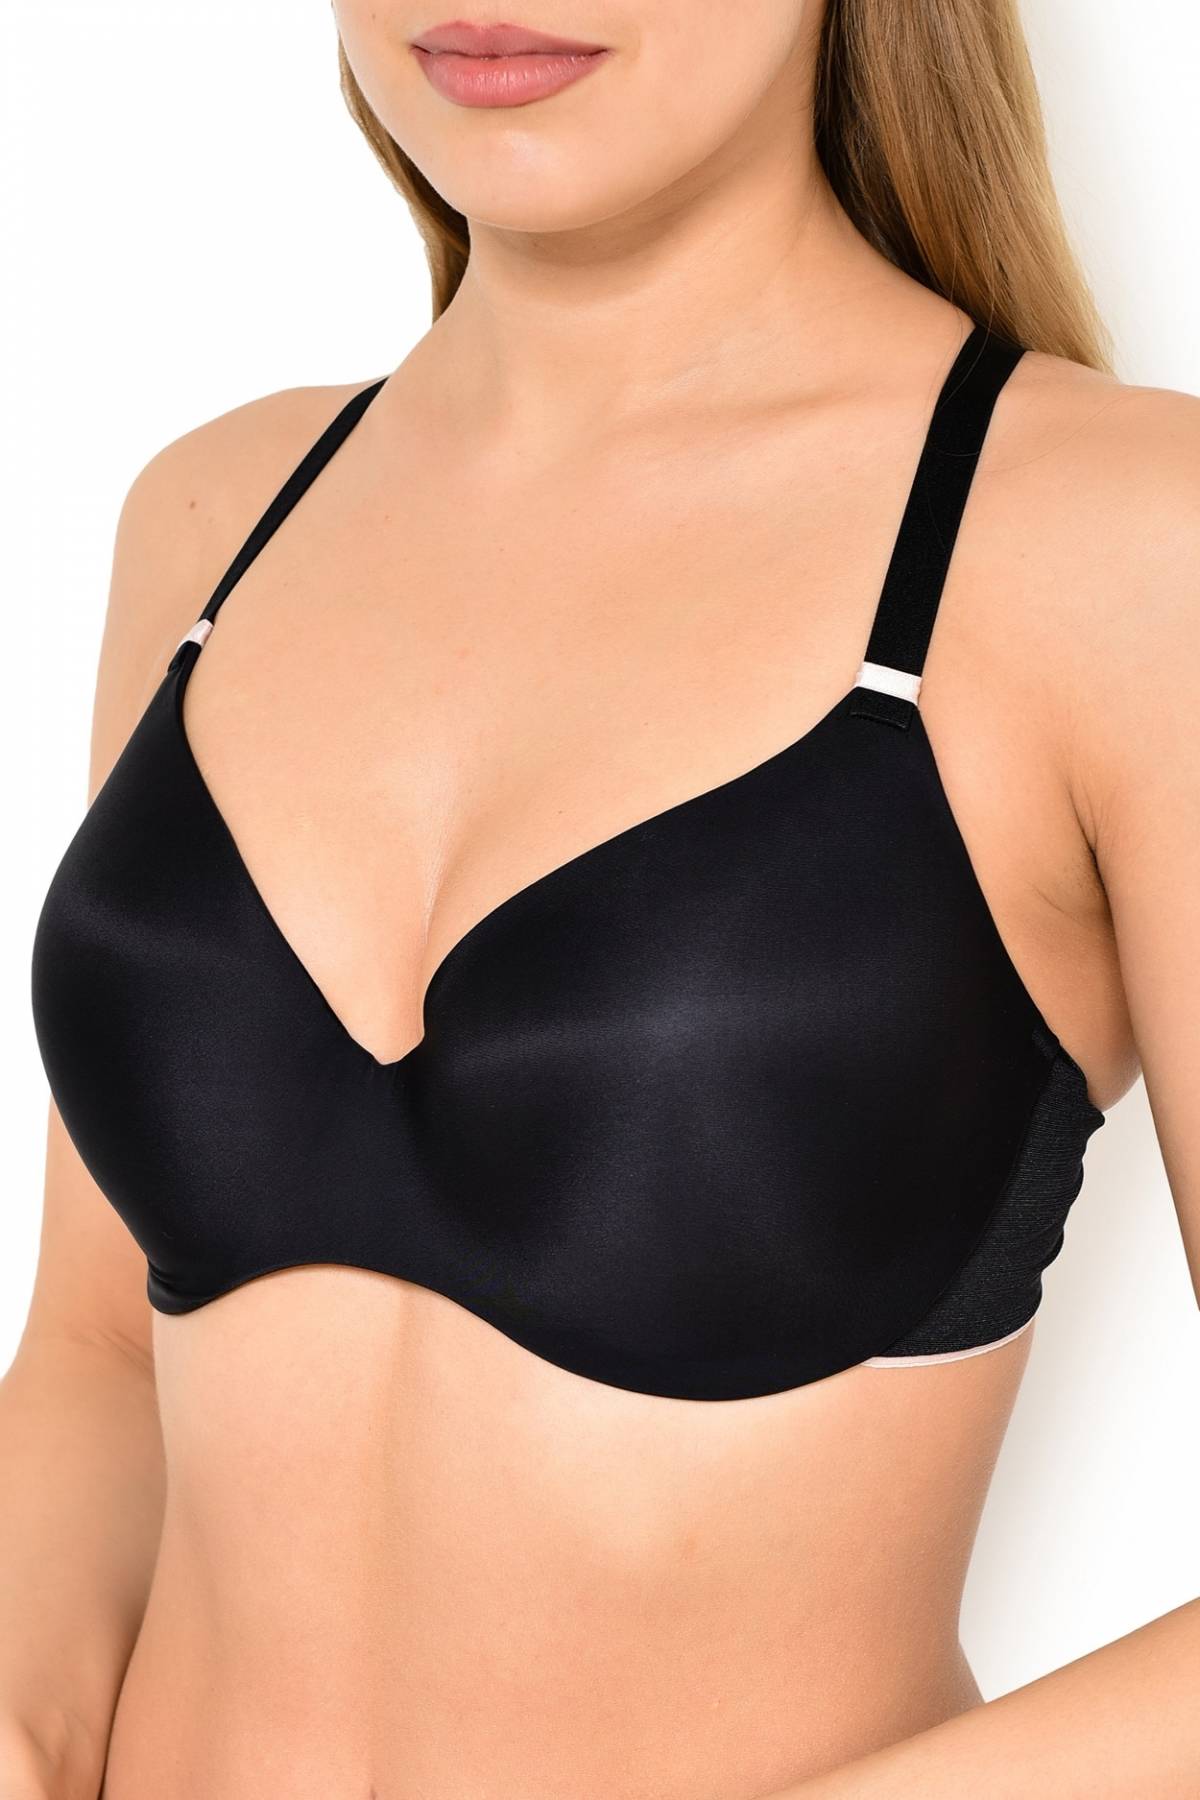  INHLUGLK Sweet Curves Scalloped Bra, Sweetsmooth - Scalloped  Design Natural Uplift Bra, Thin Soft Breathable Gathering Bras (Black,2XL)  : Clothing, Shoes & Jewelry